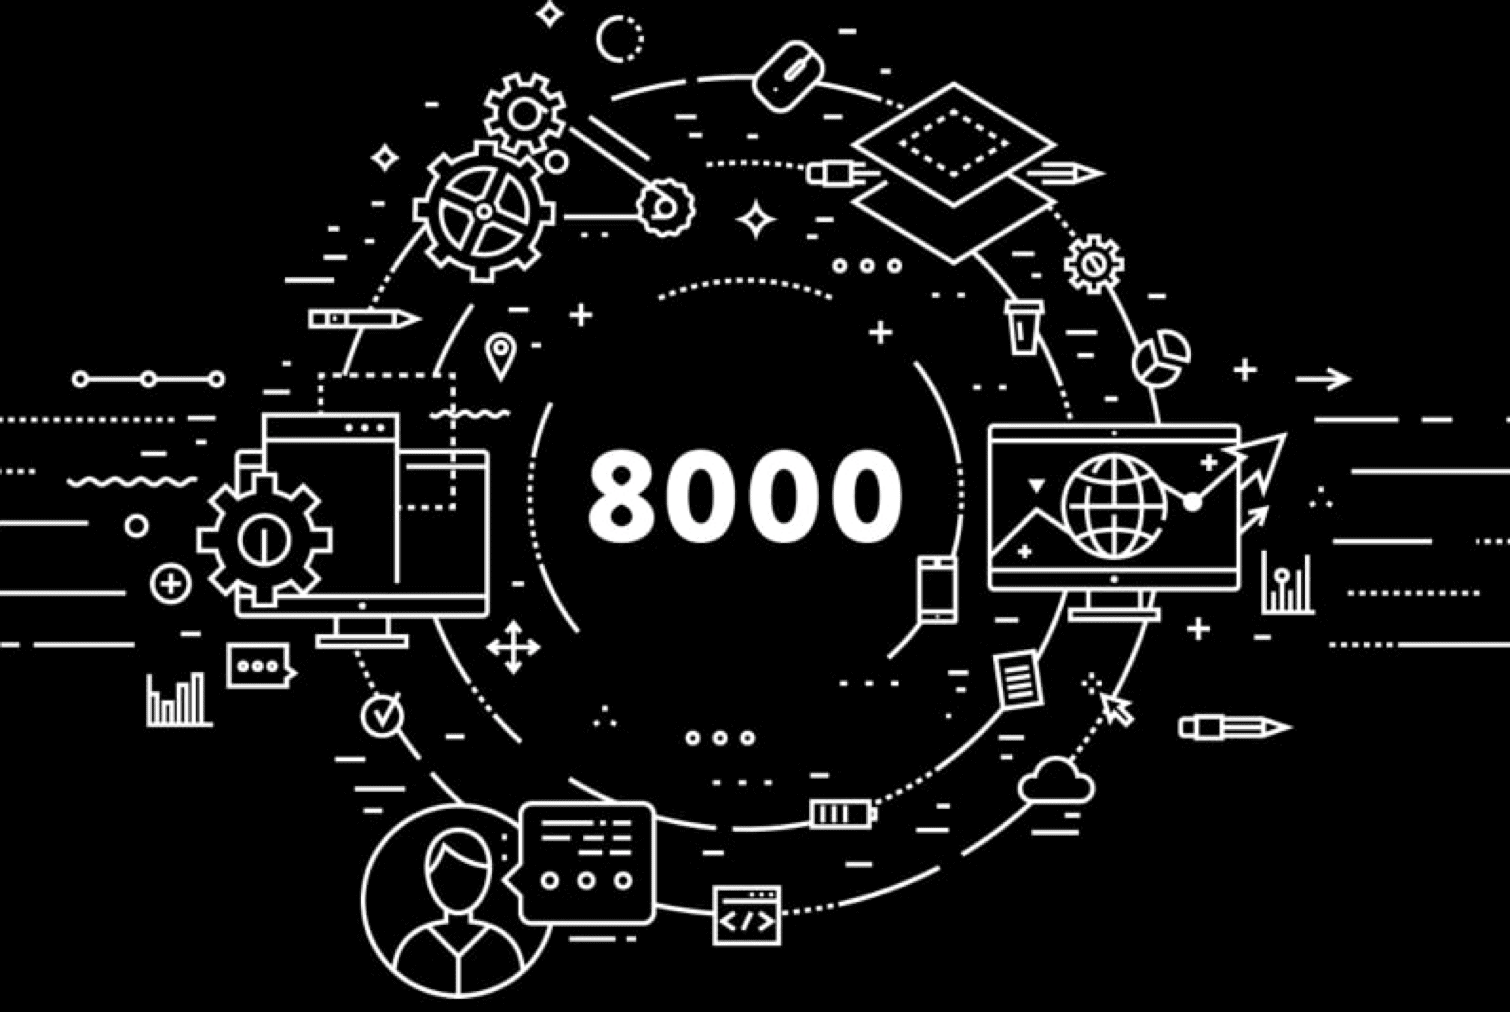 8000 projects